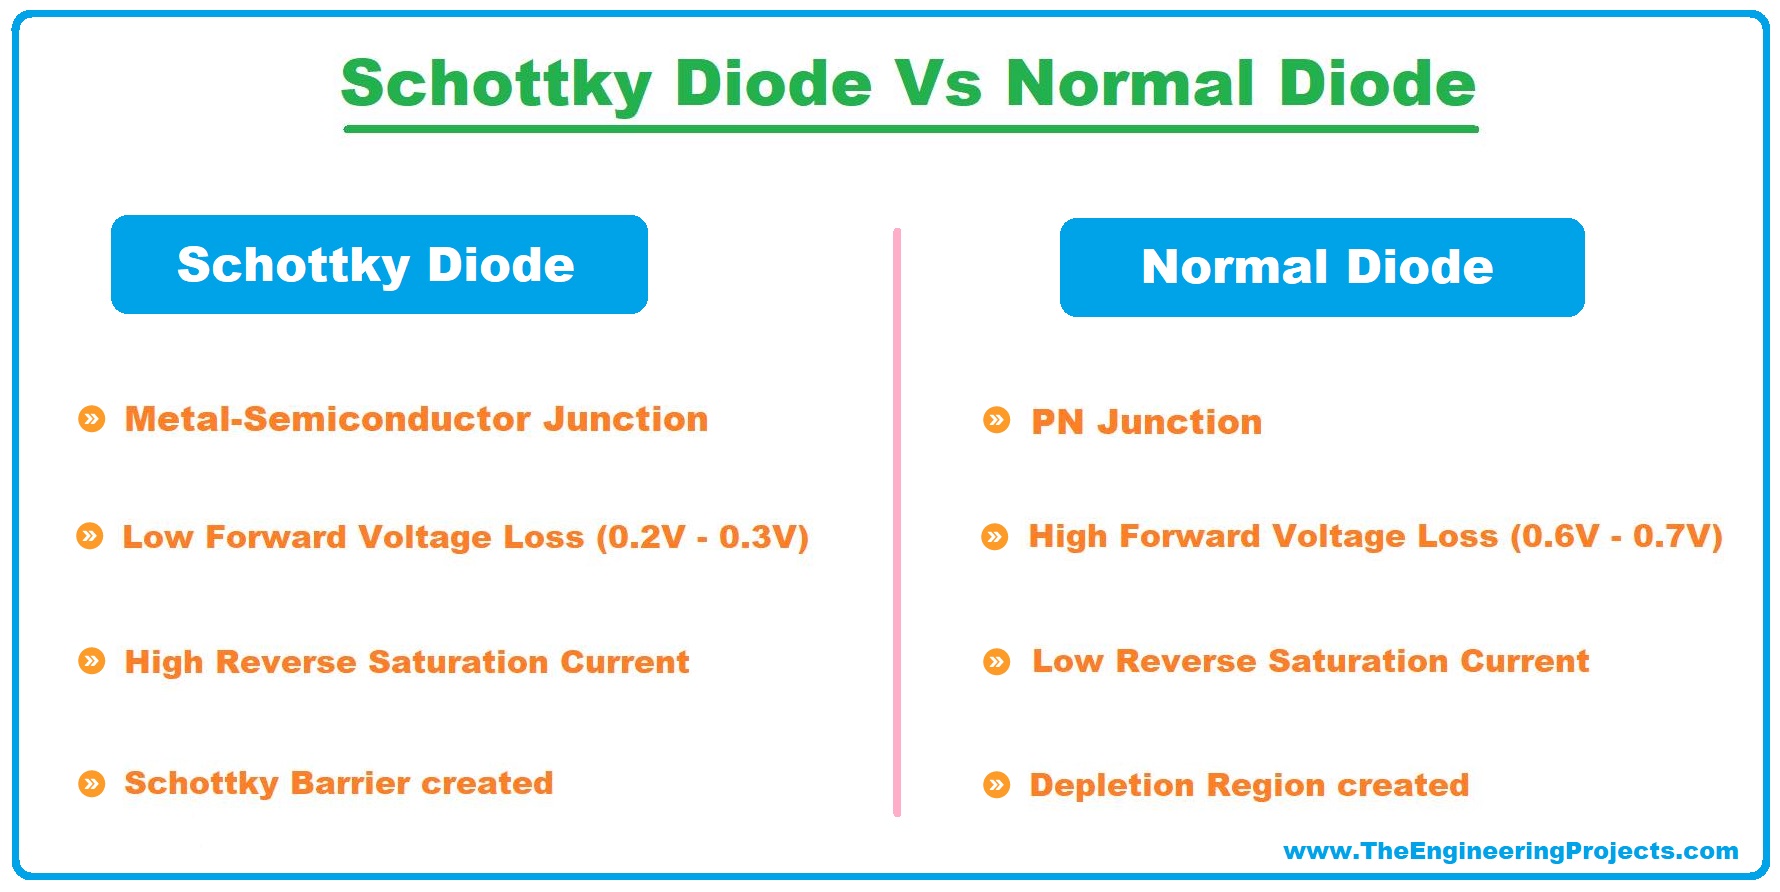 Schottky Diode, Schottky barrier diode, Schottky barrier, Schottky Diode working, Schottky Diode application, Schottky Diode characteristics, Schottky Diode vs normal diode